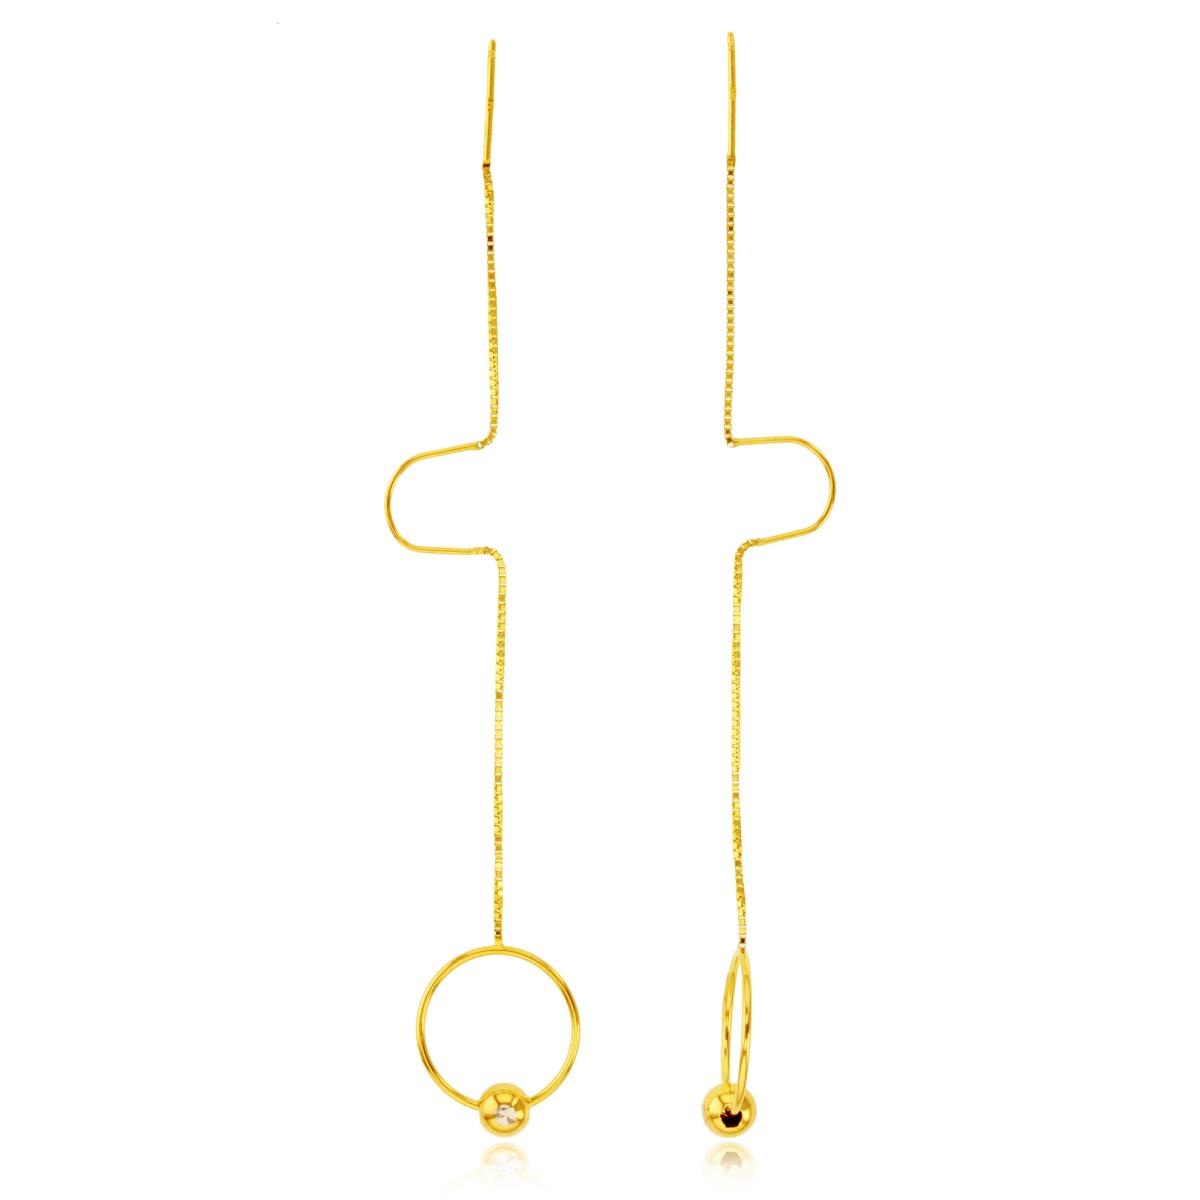 14K Yellow Gold Open Circle with 5mm Bead on Chain Dangling Earring